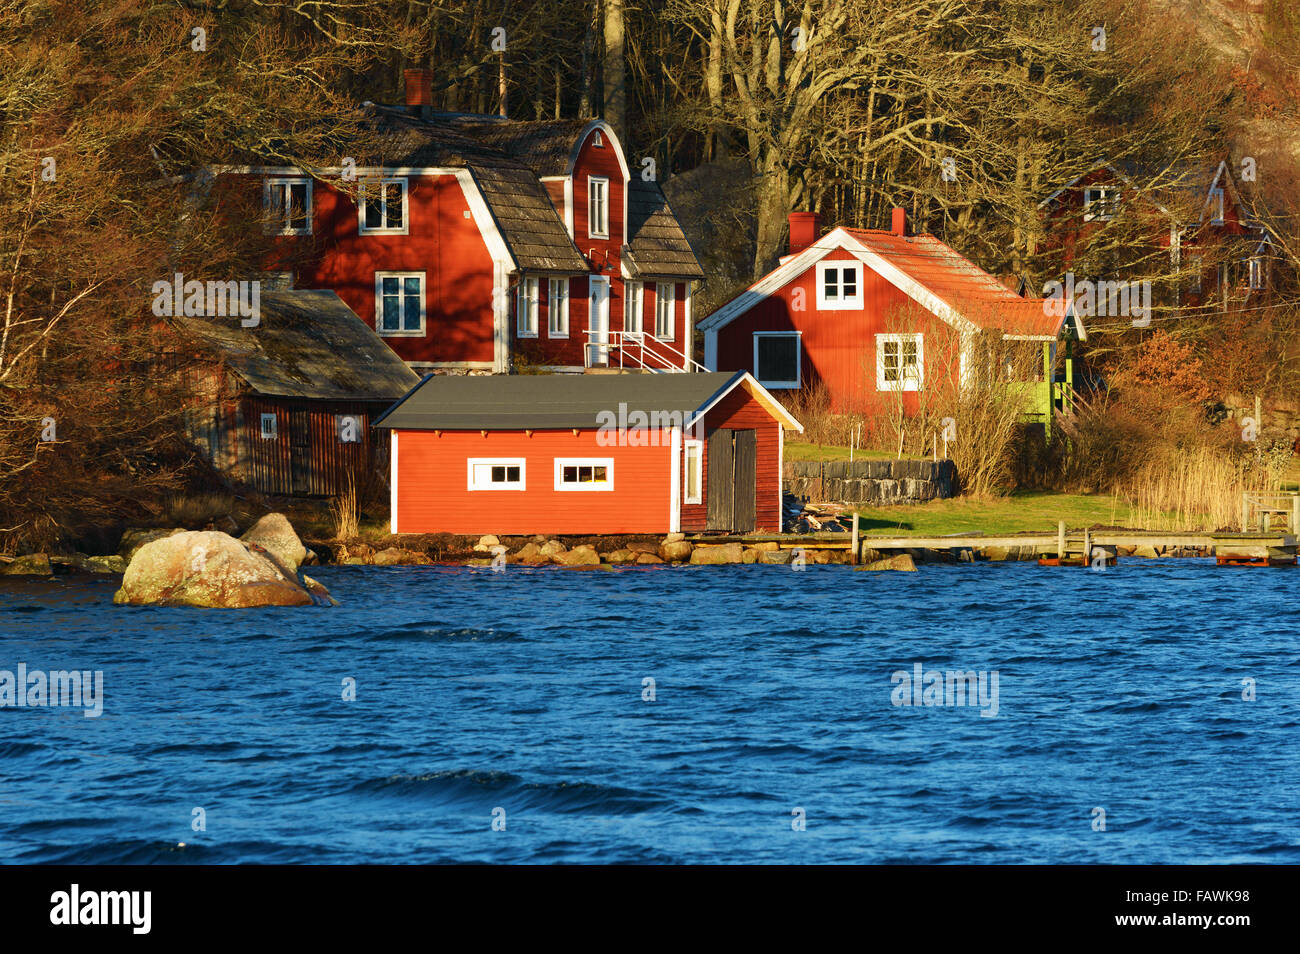 Ronneby, Sweden - December 30, 2015: Lovely red homestead close to water. A law demanding repayment on mortgages is suggested to Stock Photo